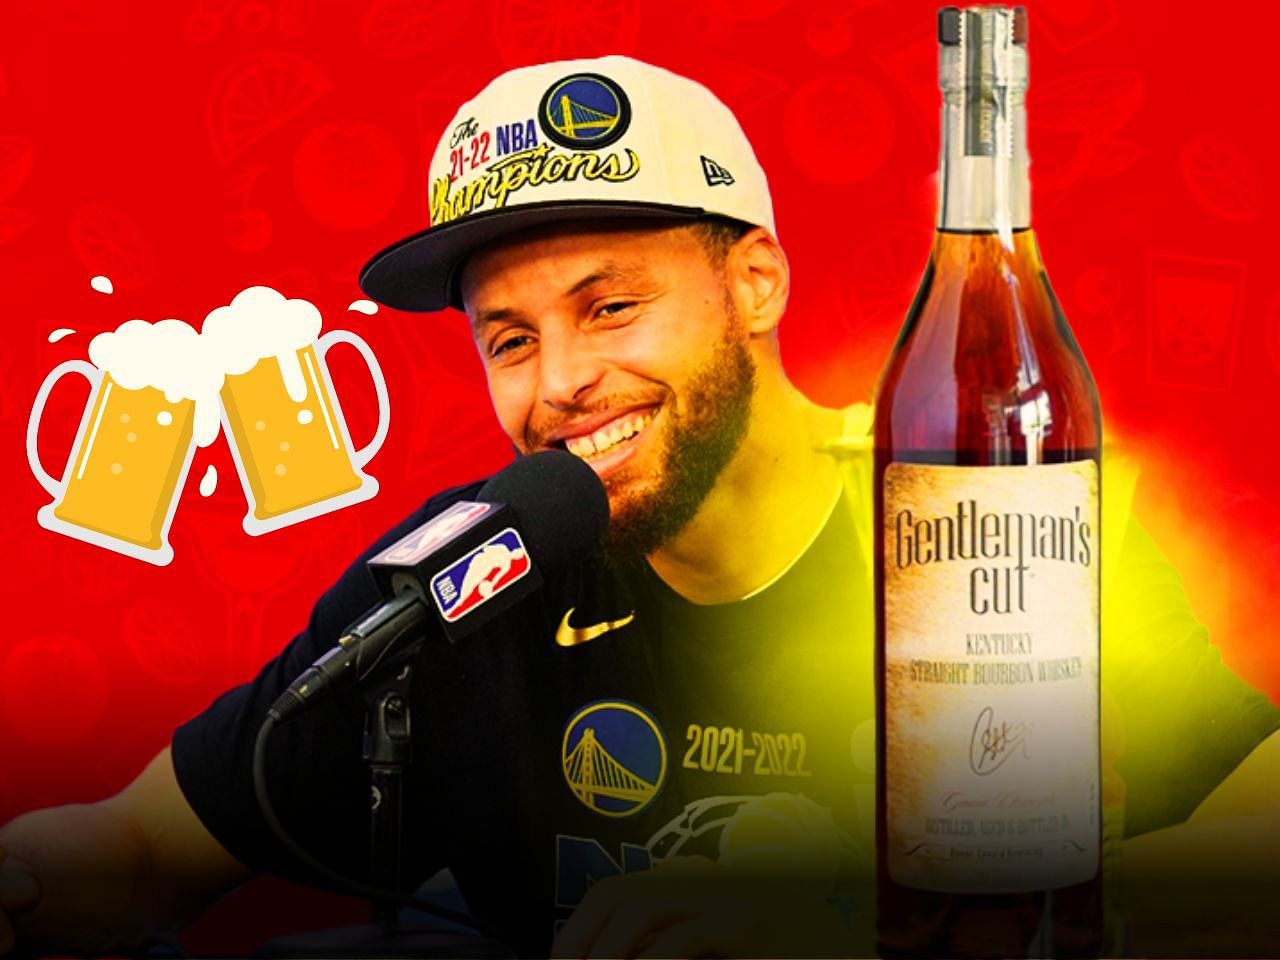 Steph Curry announces launch of his bourbon whiskey